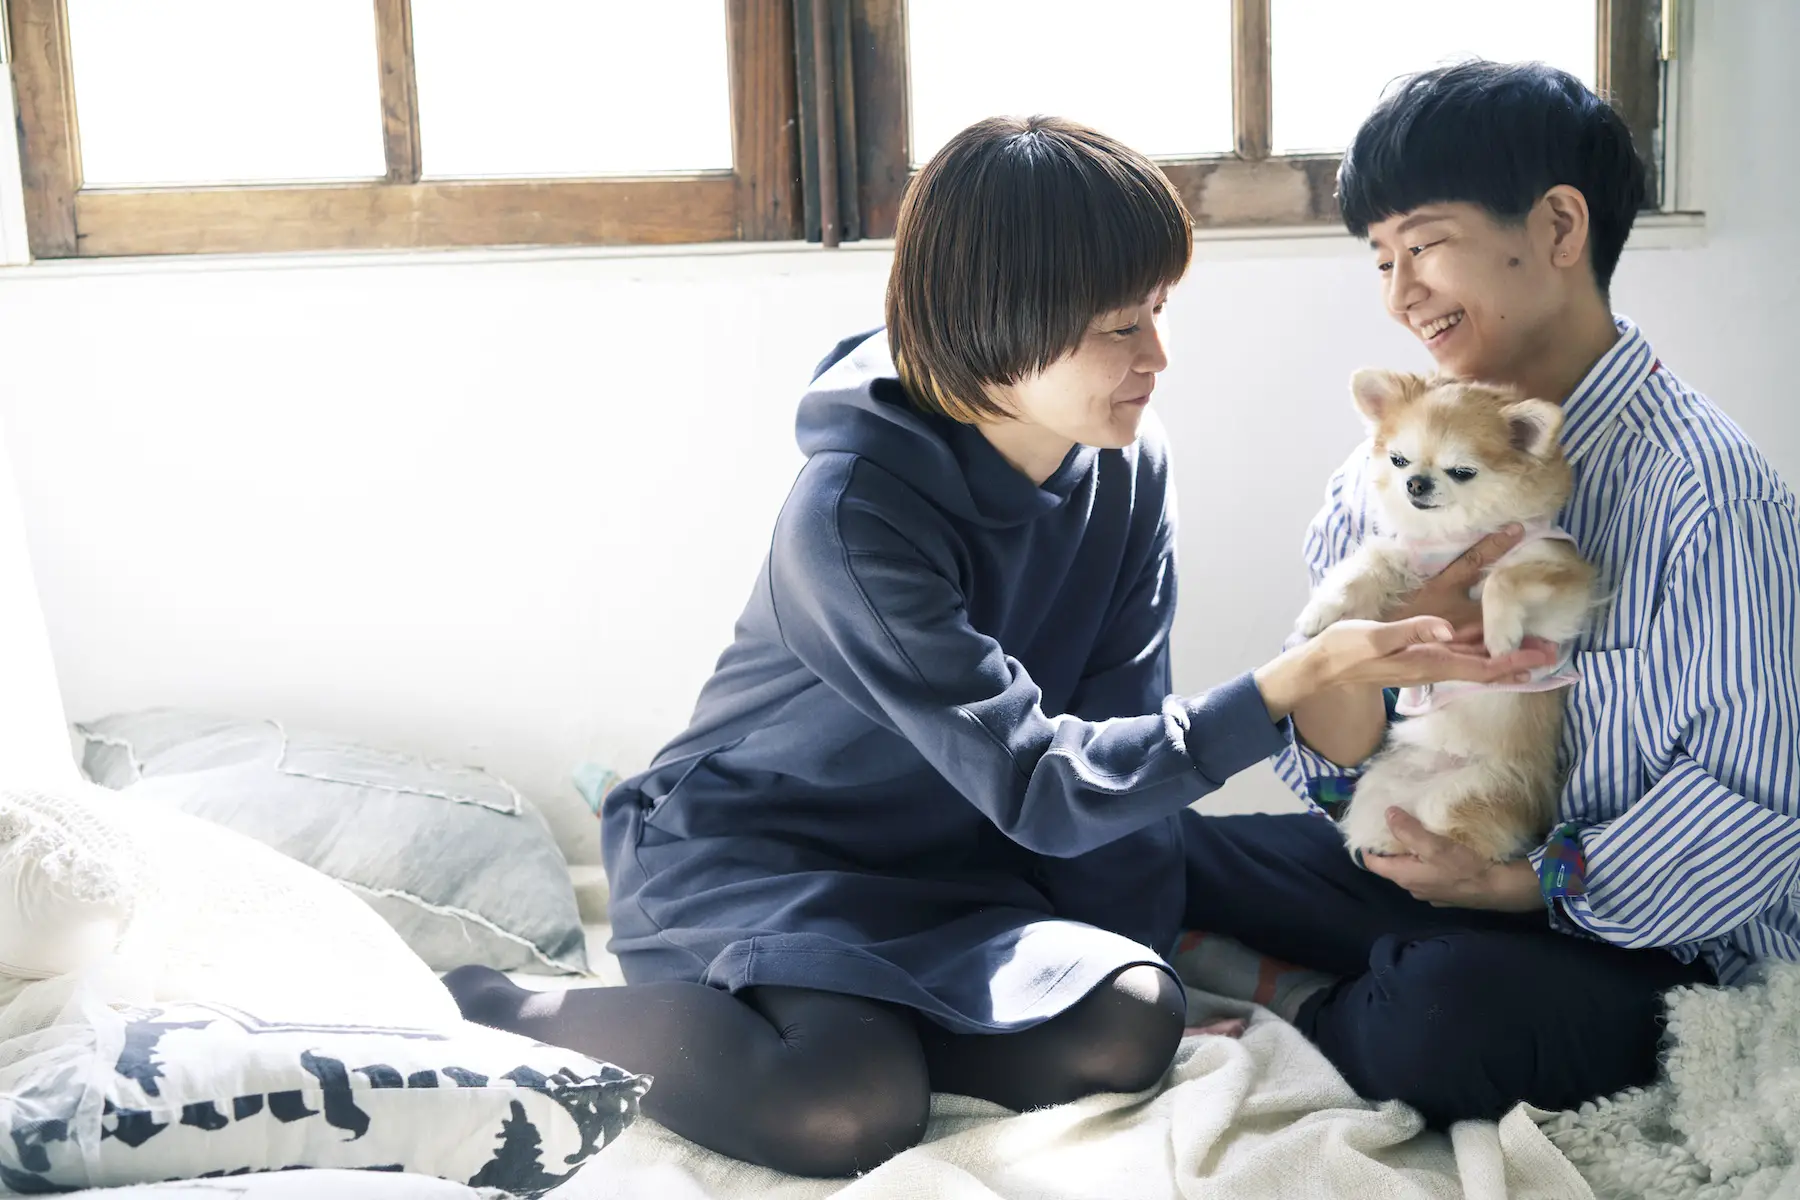 A couple sits on the bed together smiling and playing with their small dog